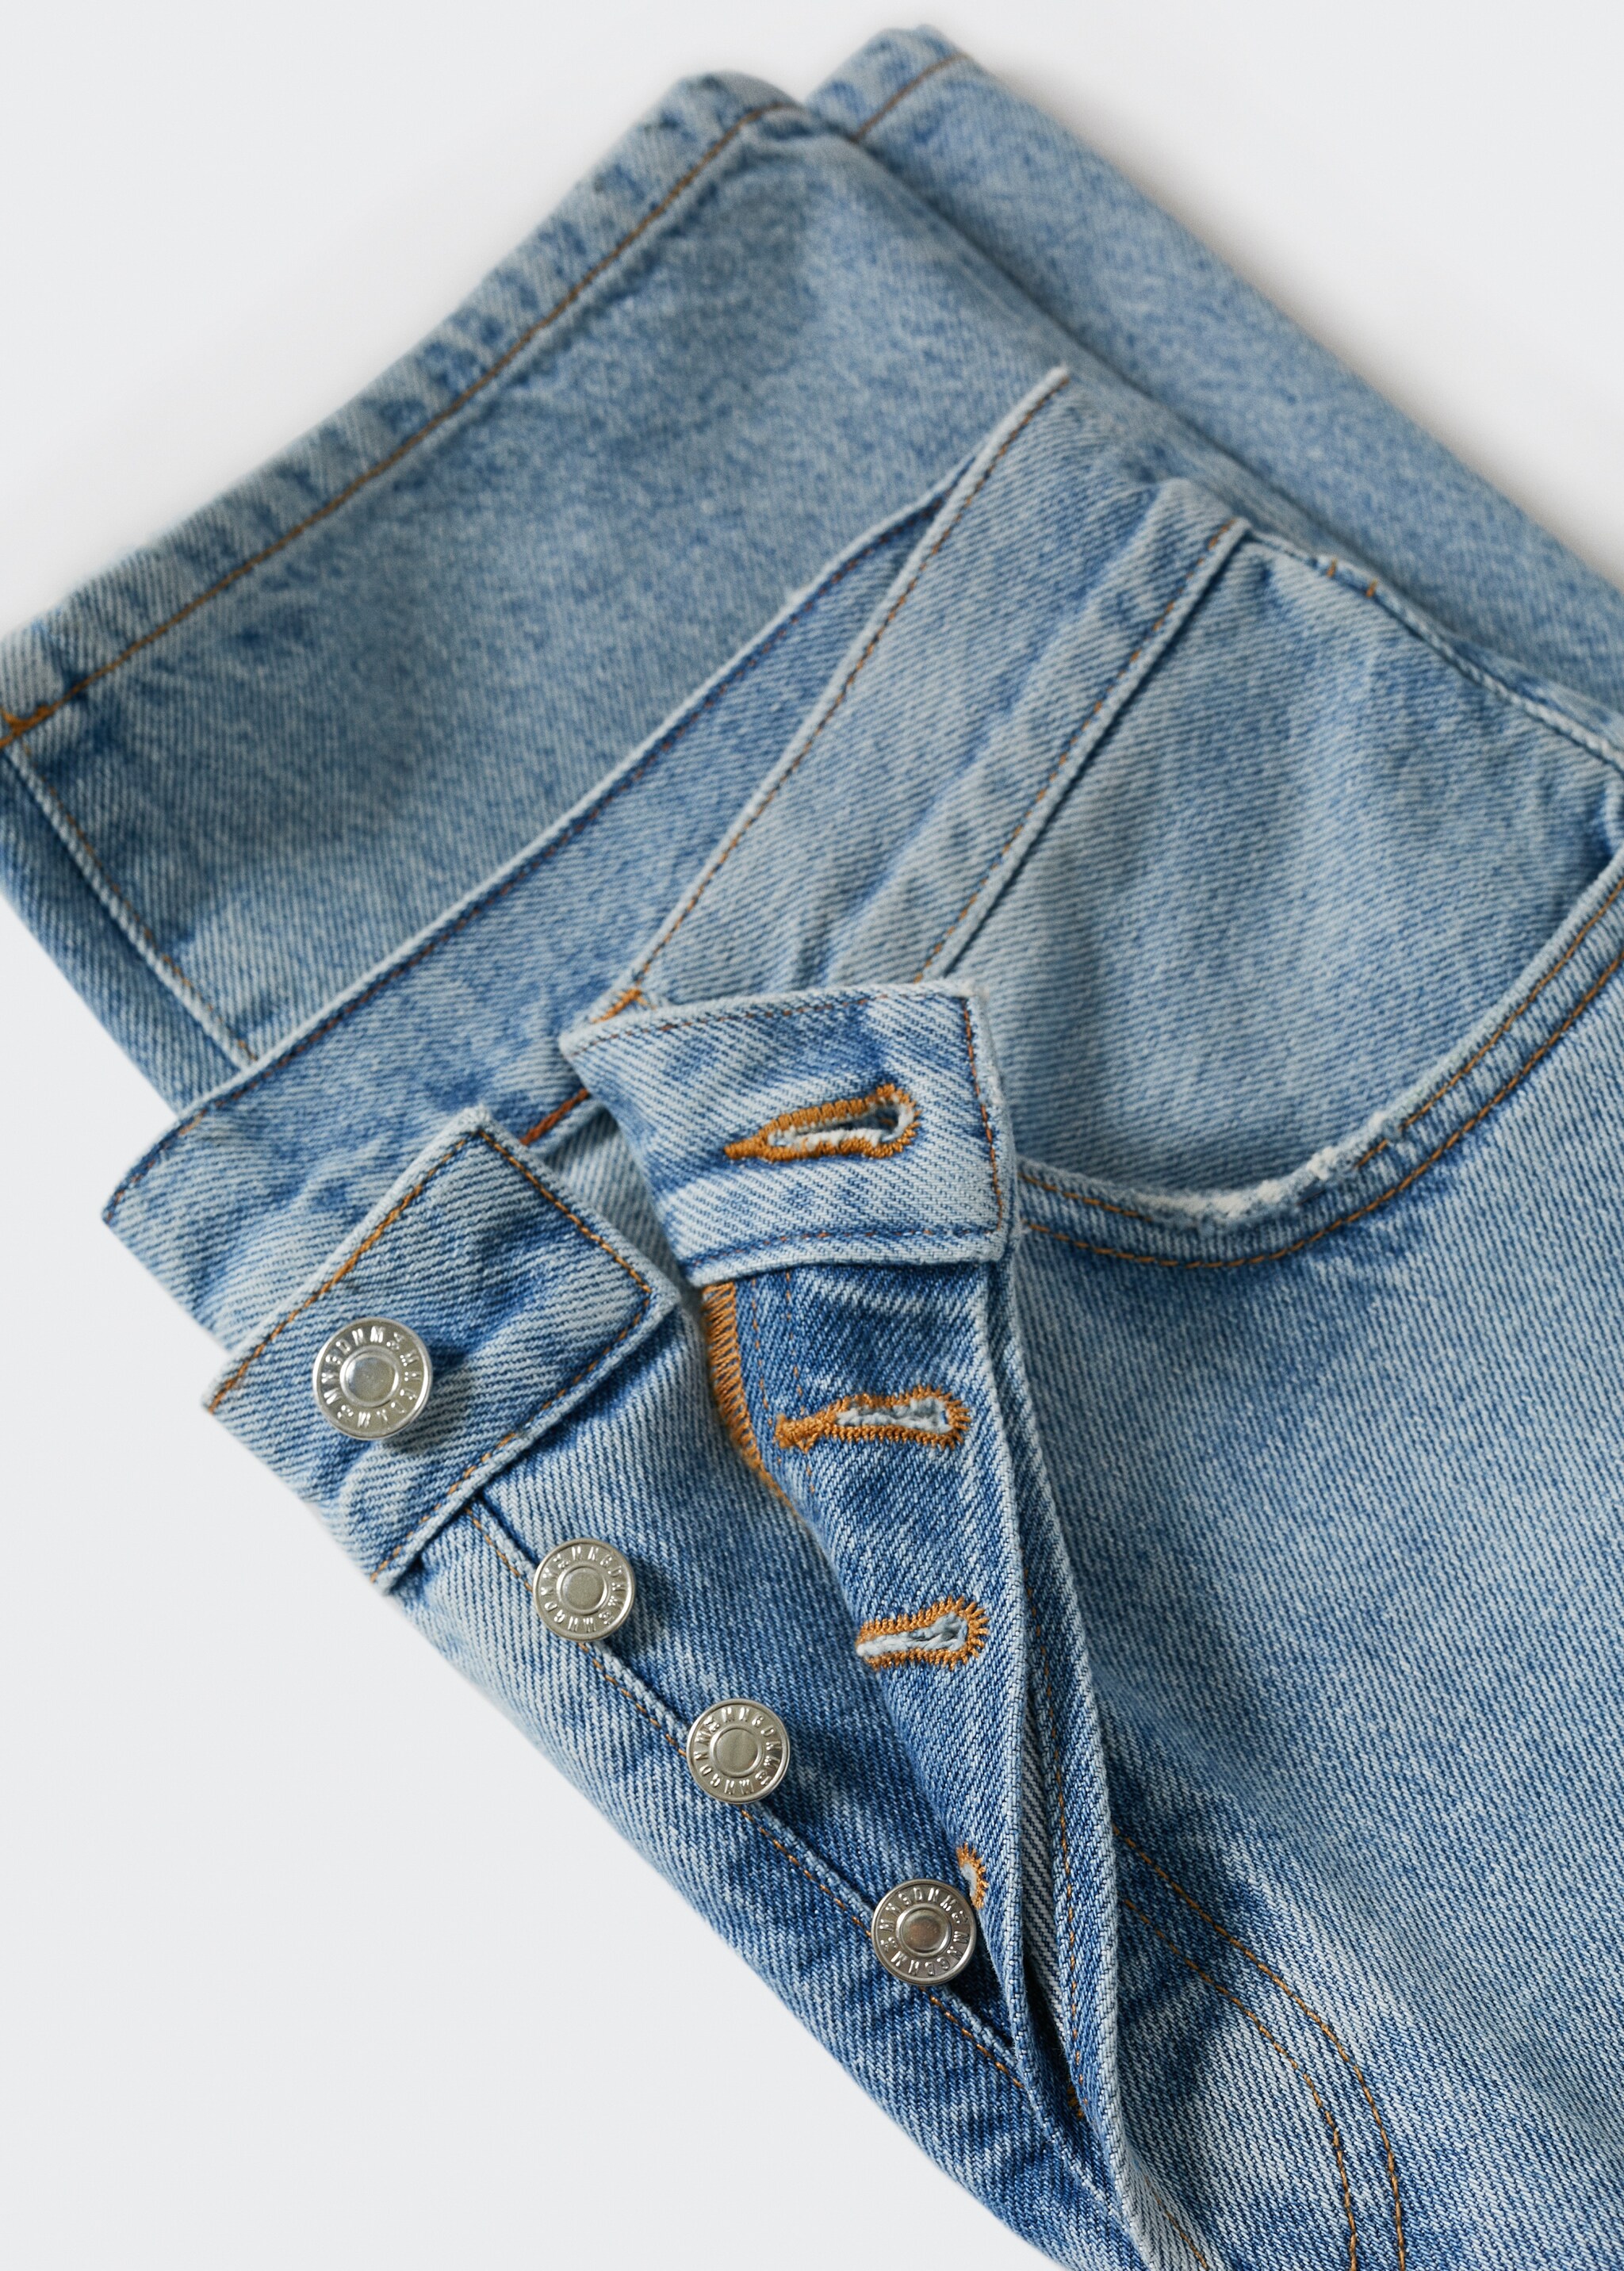 Straight low-waist jeans - Details of the article 8